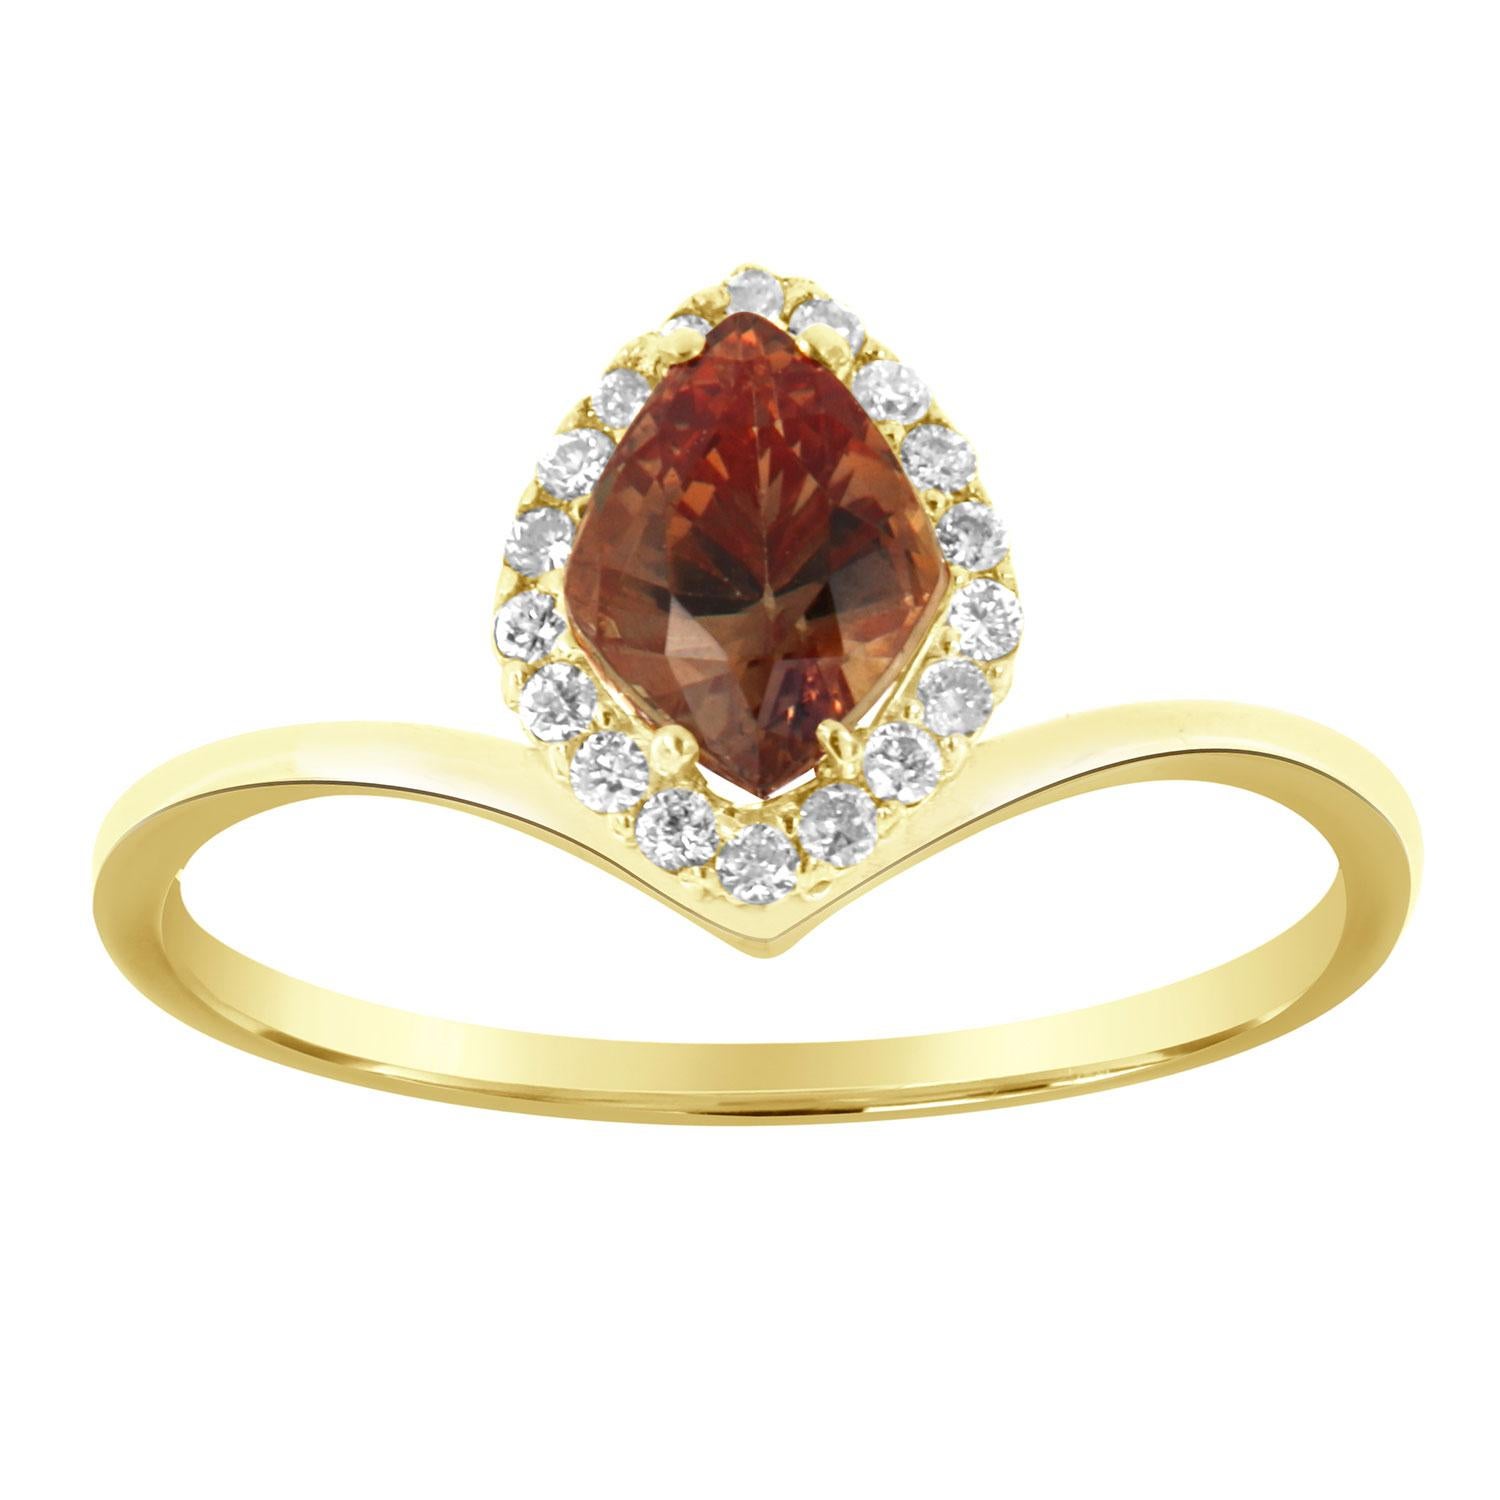 This 14k yellow gold ring features a 1.16 Carat Kite-shaped Natural Sapphire in vibrant Champagne color with an excellent luster, encircled by a halo of brilliant round diamonds on a 1.2 mm wide band. A perfectly matched V-shaped diamond band